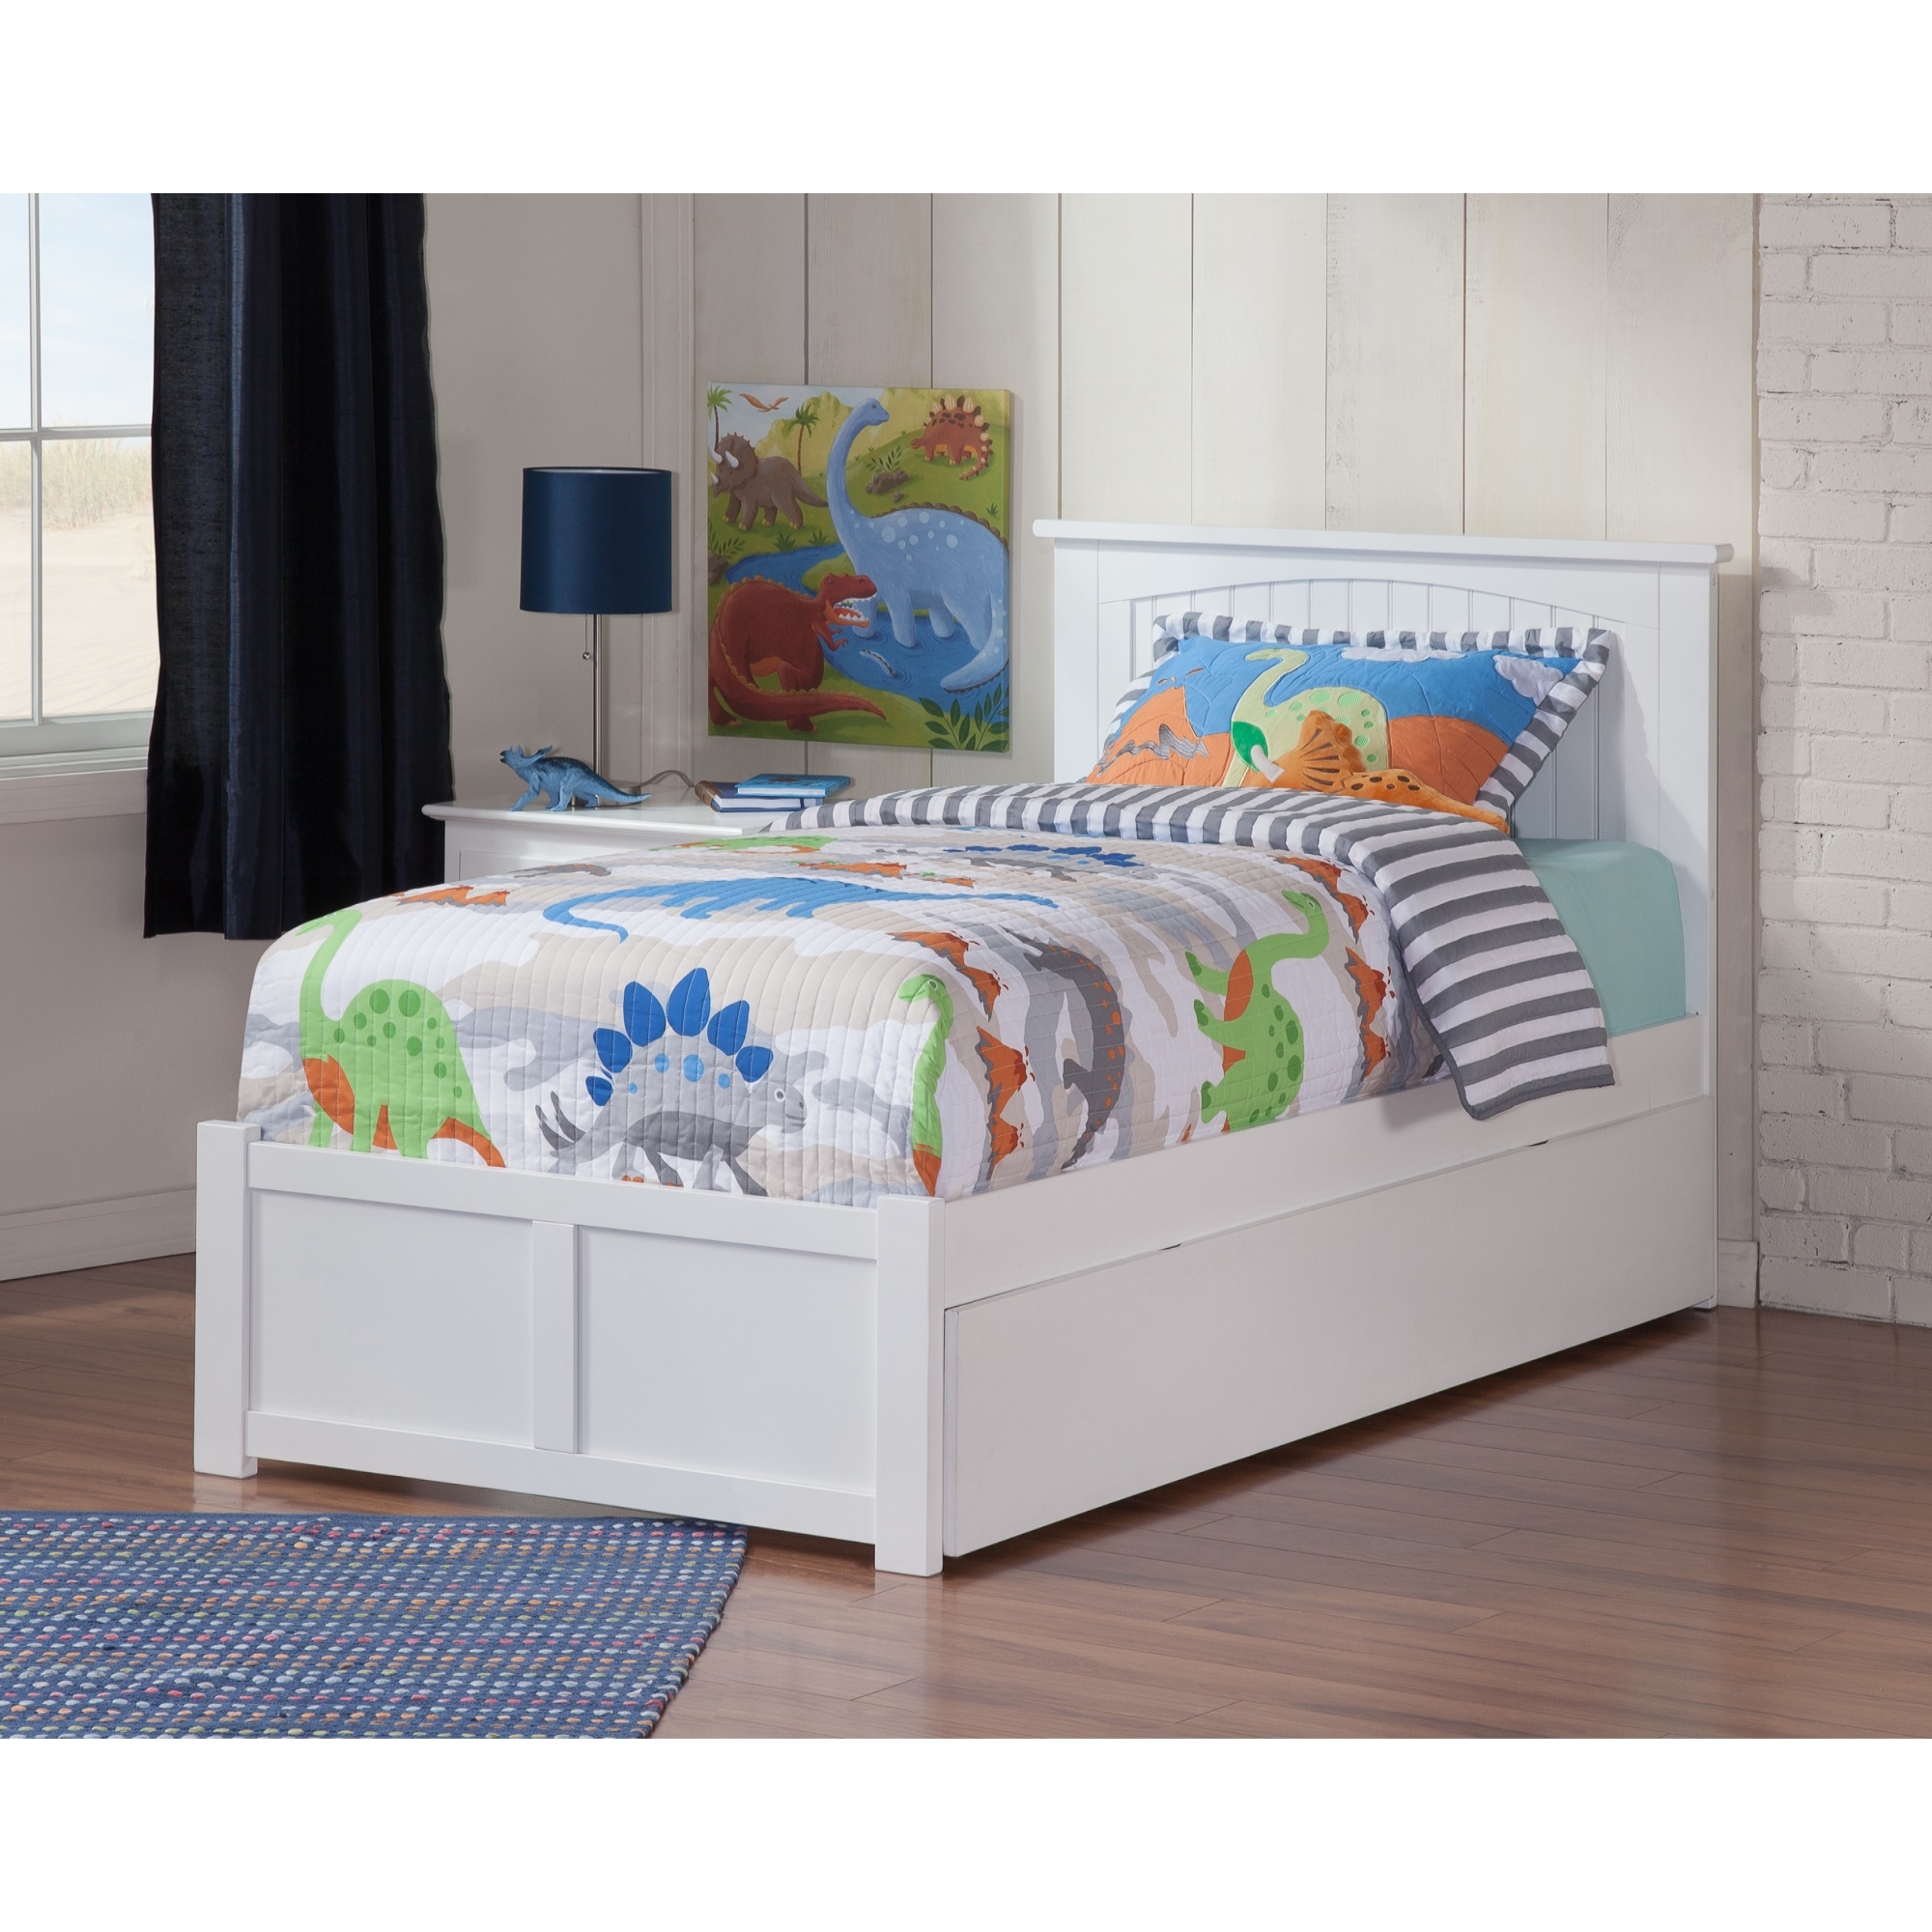 White Twin Bed With Storage Visualhunt, White Twin Platform Bed